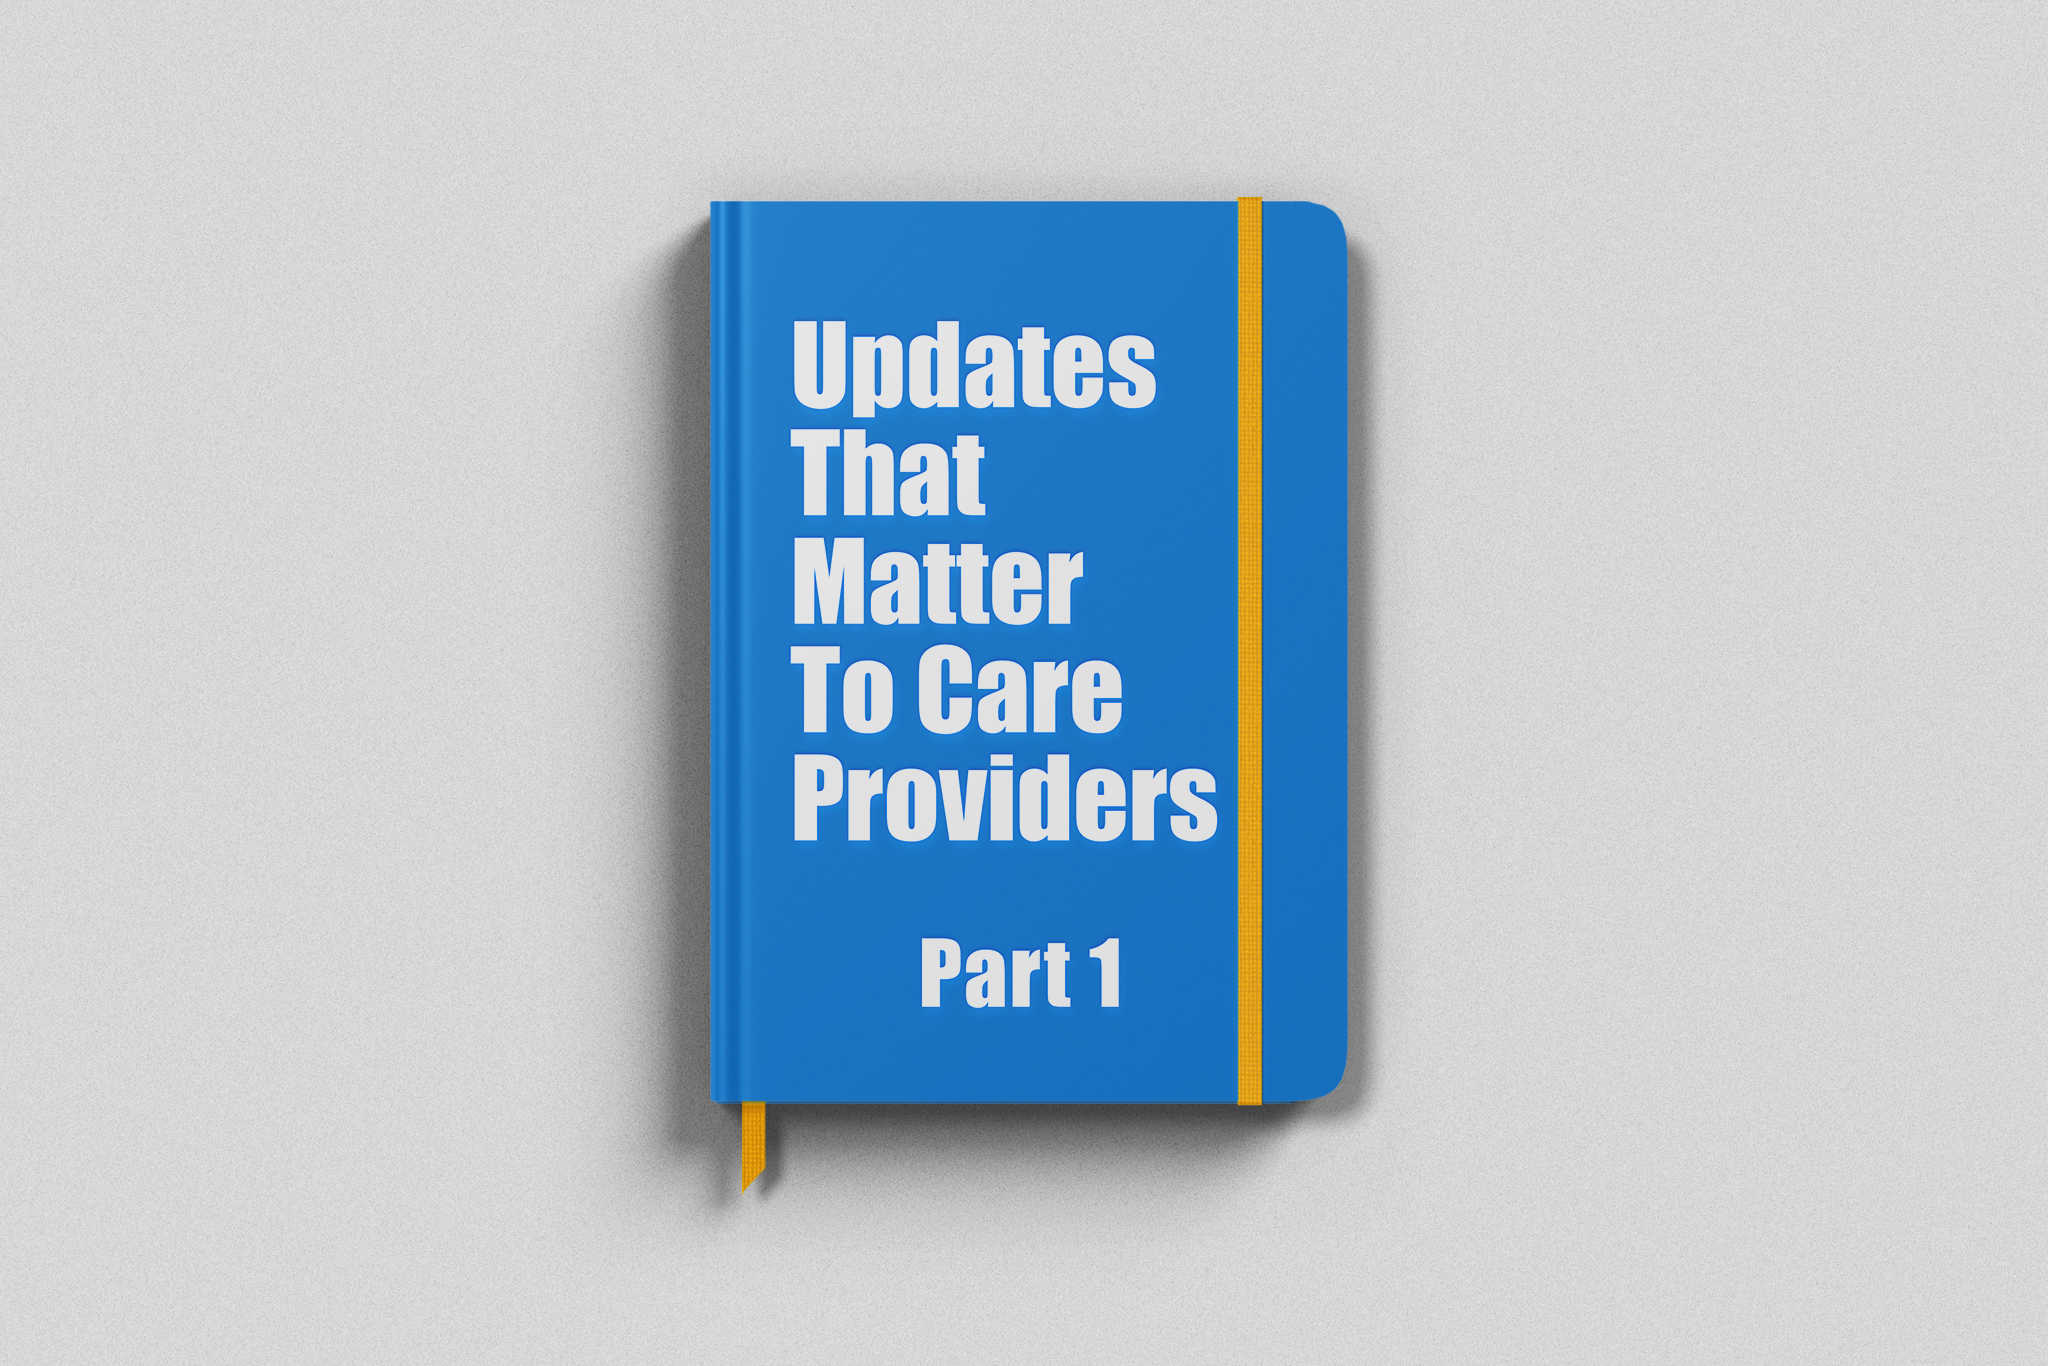 Updates That Matter to Care Providers